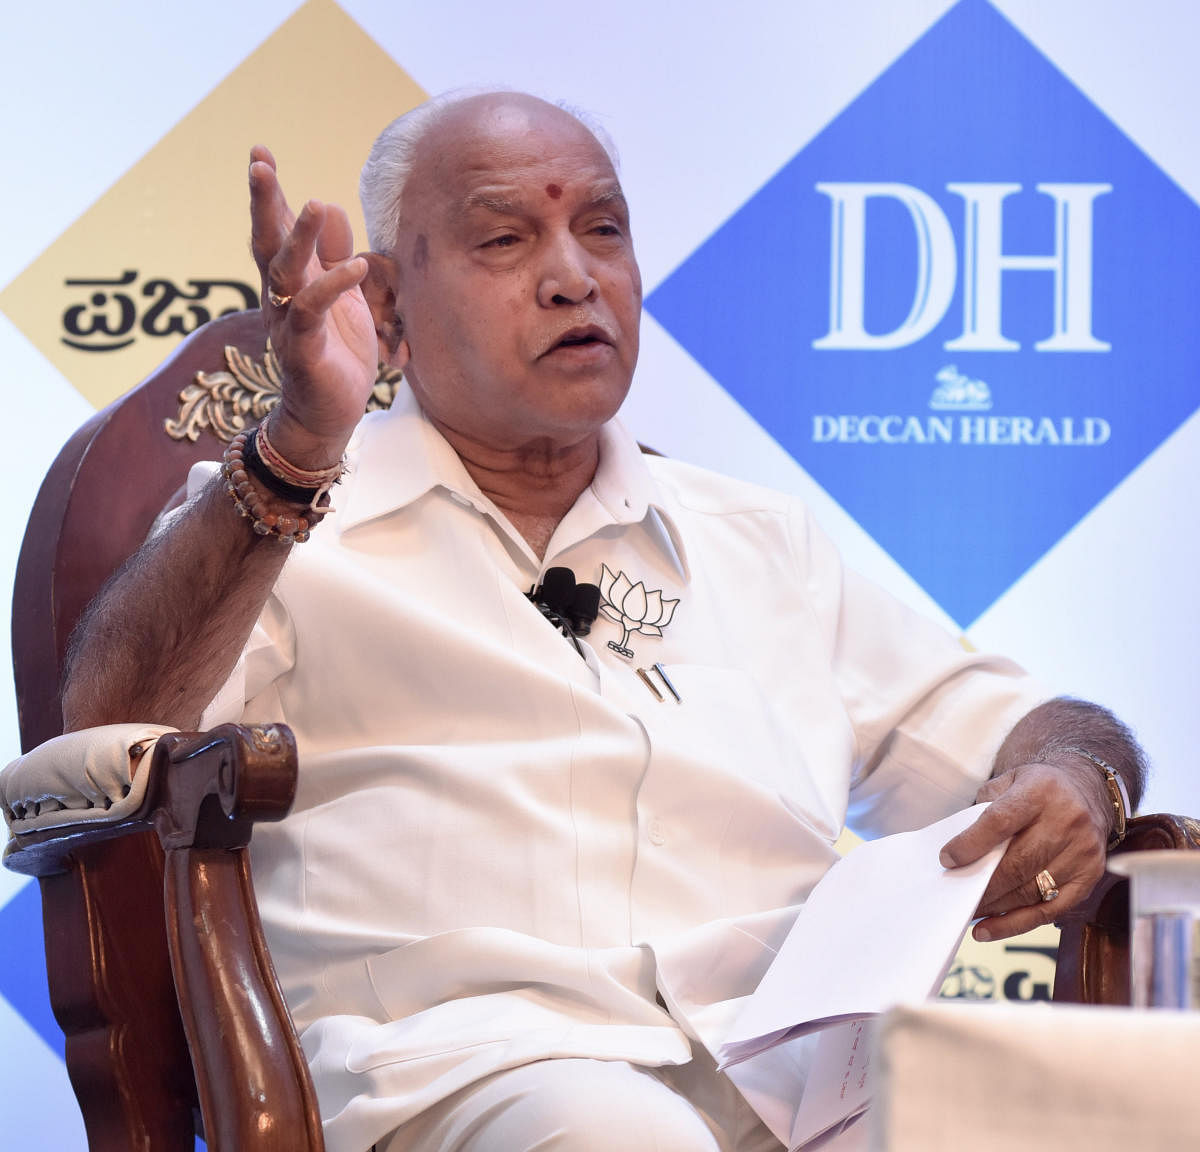 During an interaction with DH and Prajavani, Yeddyurappa said Sumalatha’s growing popularity cannot be ignored. (DH Photo)